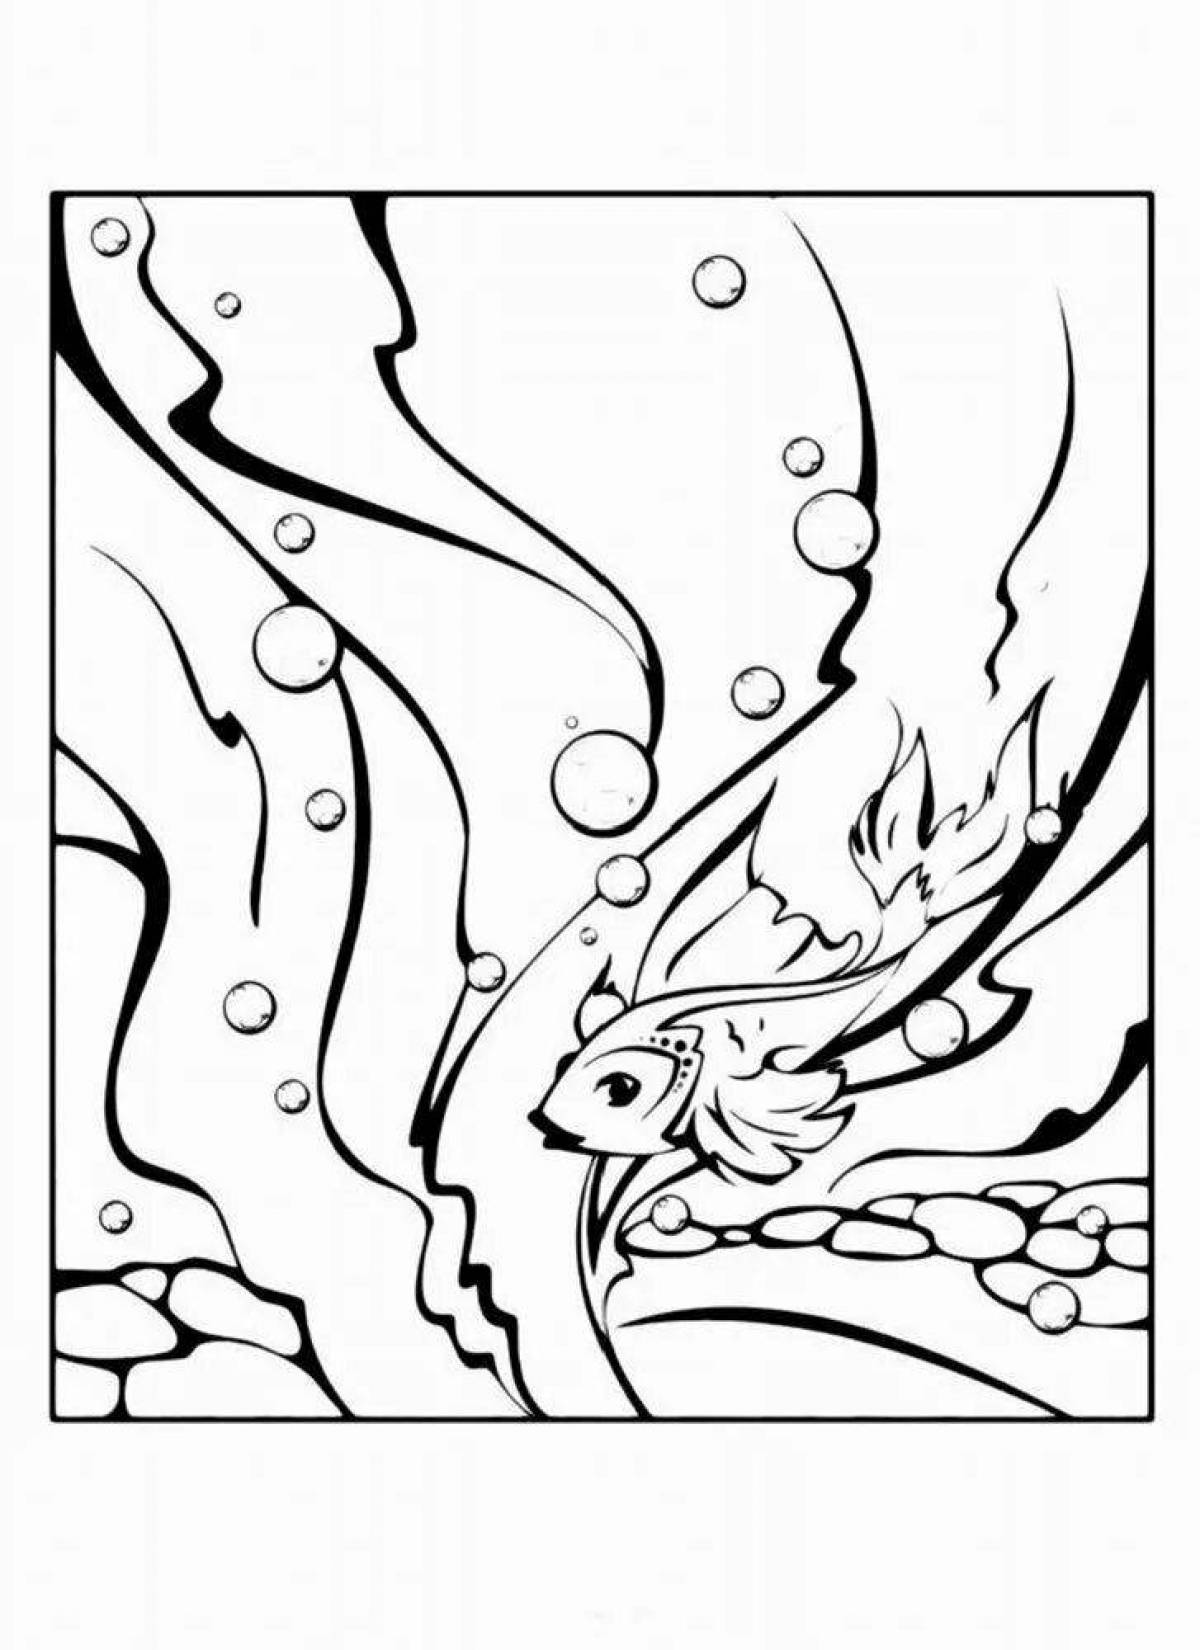 Delightful goldfish story coloring page